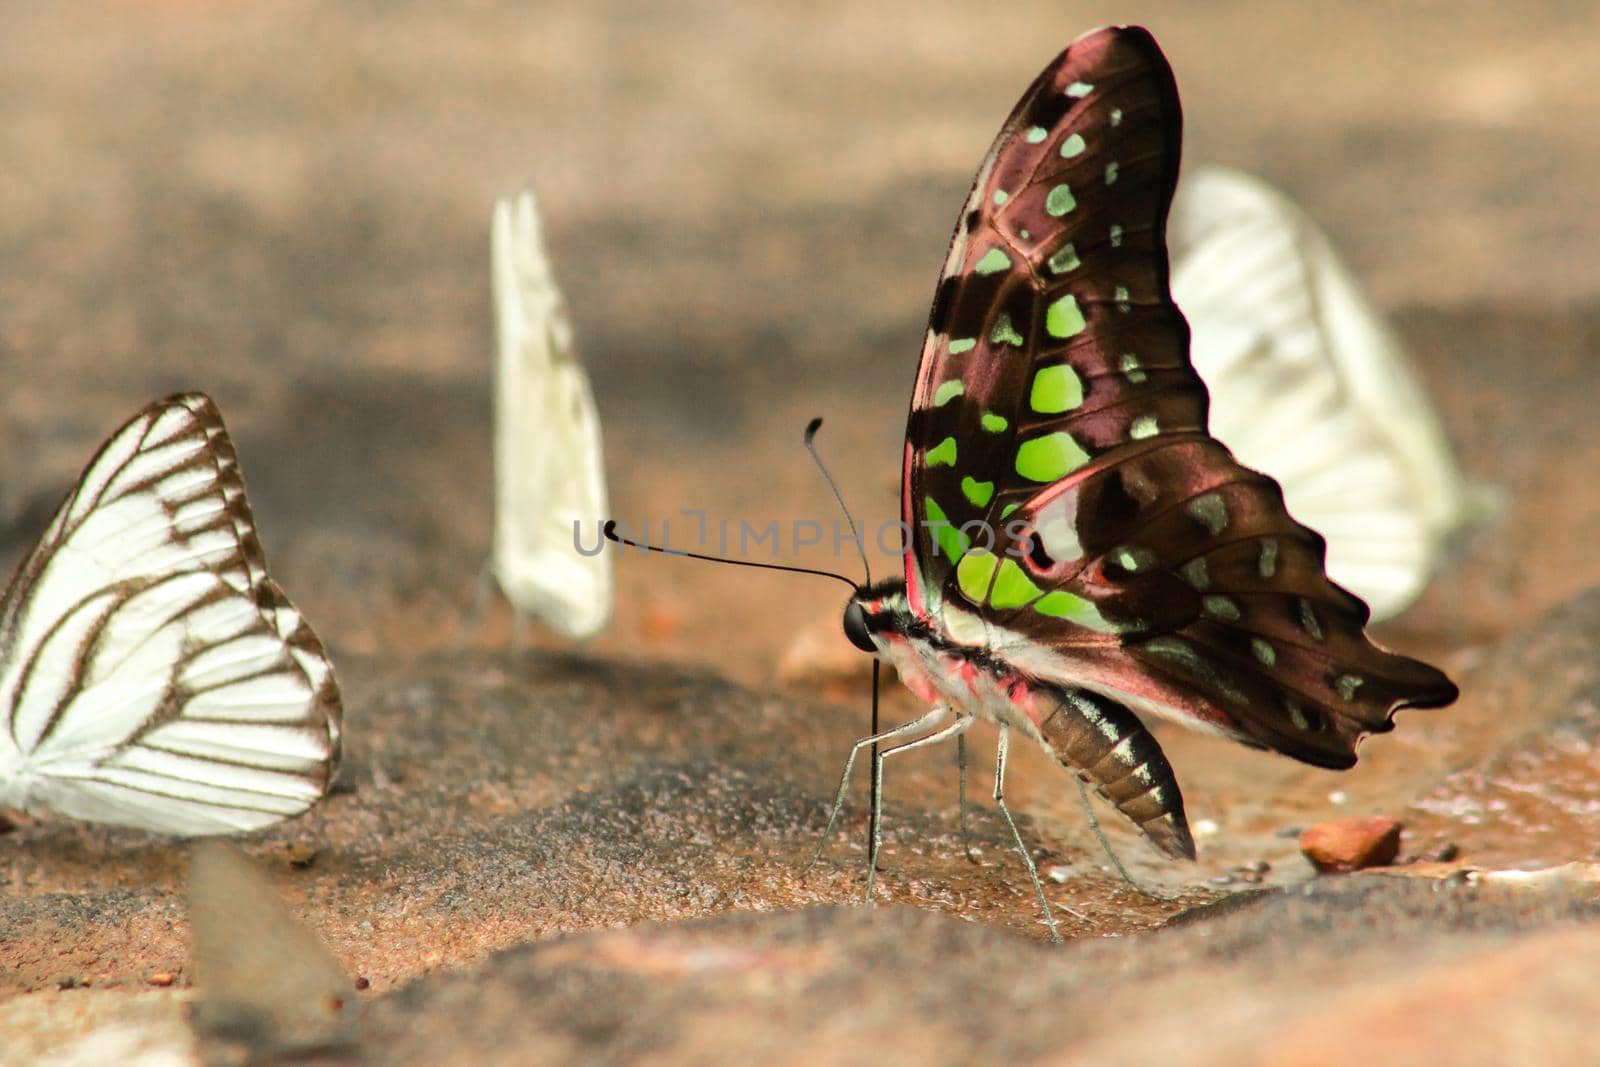 Graphium arycles Boisduval, Spotted Jay Appearance: Light green streaks and stripes across both wings.

